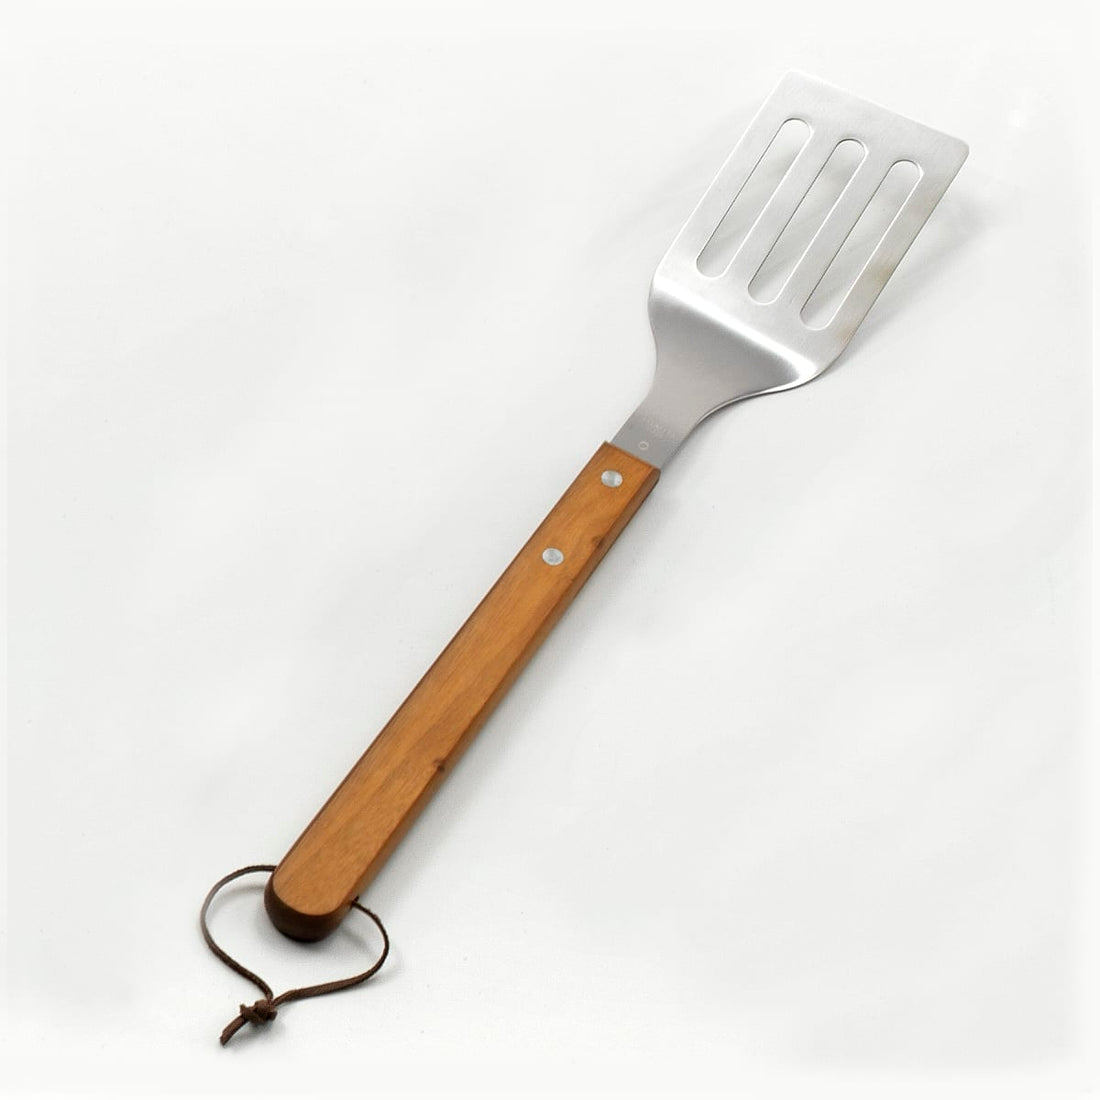 STAINLESS STEEL AND WOOD BARBECUE SHOVEL